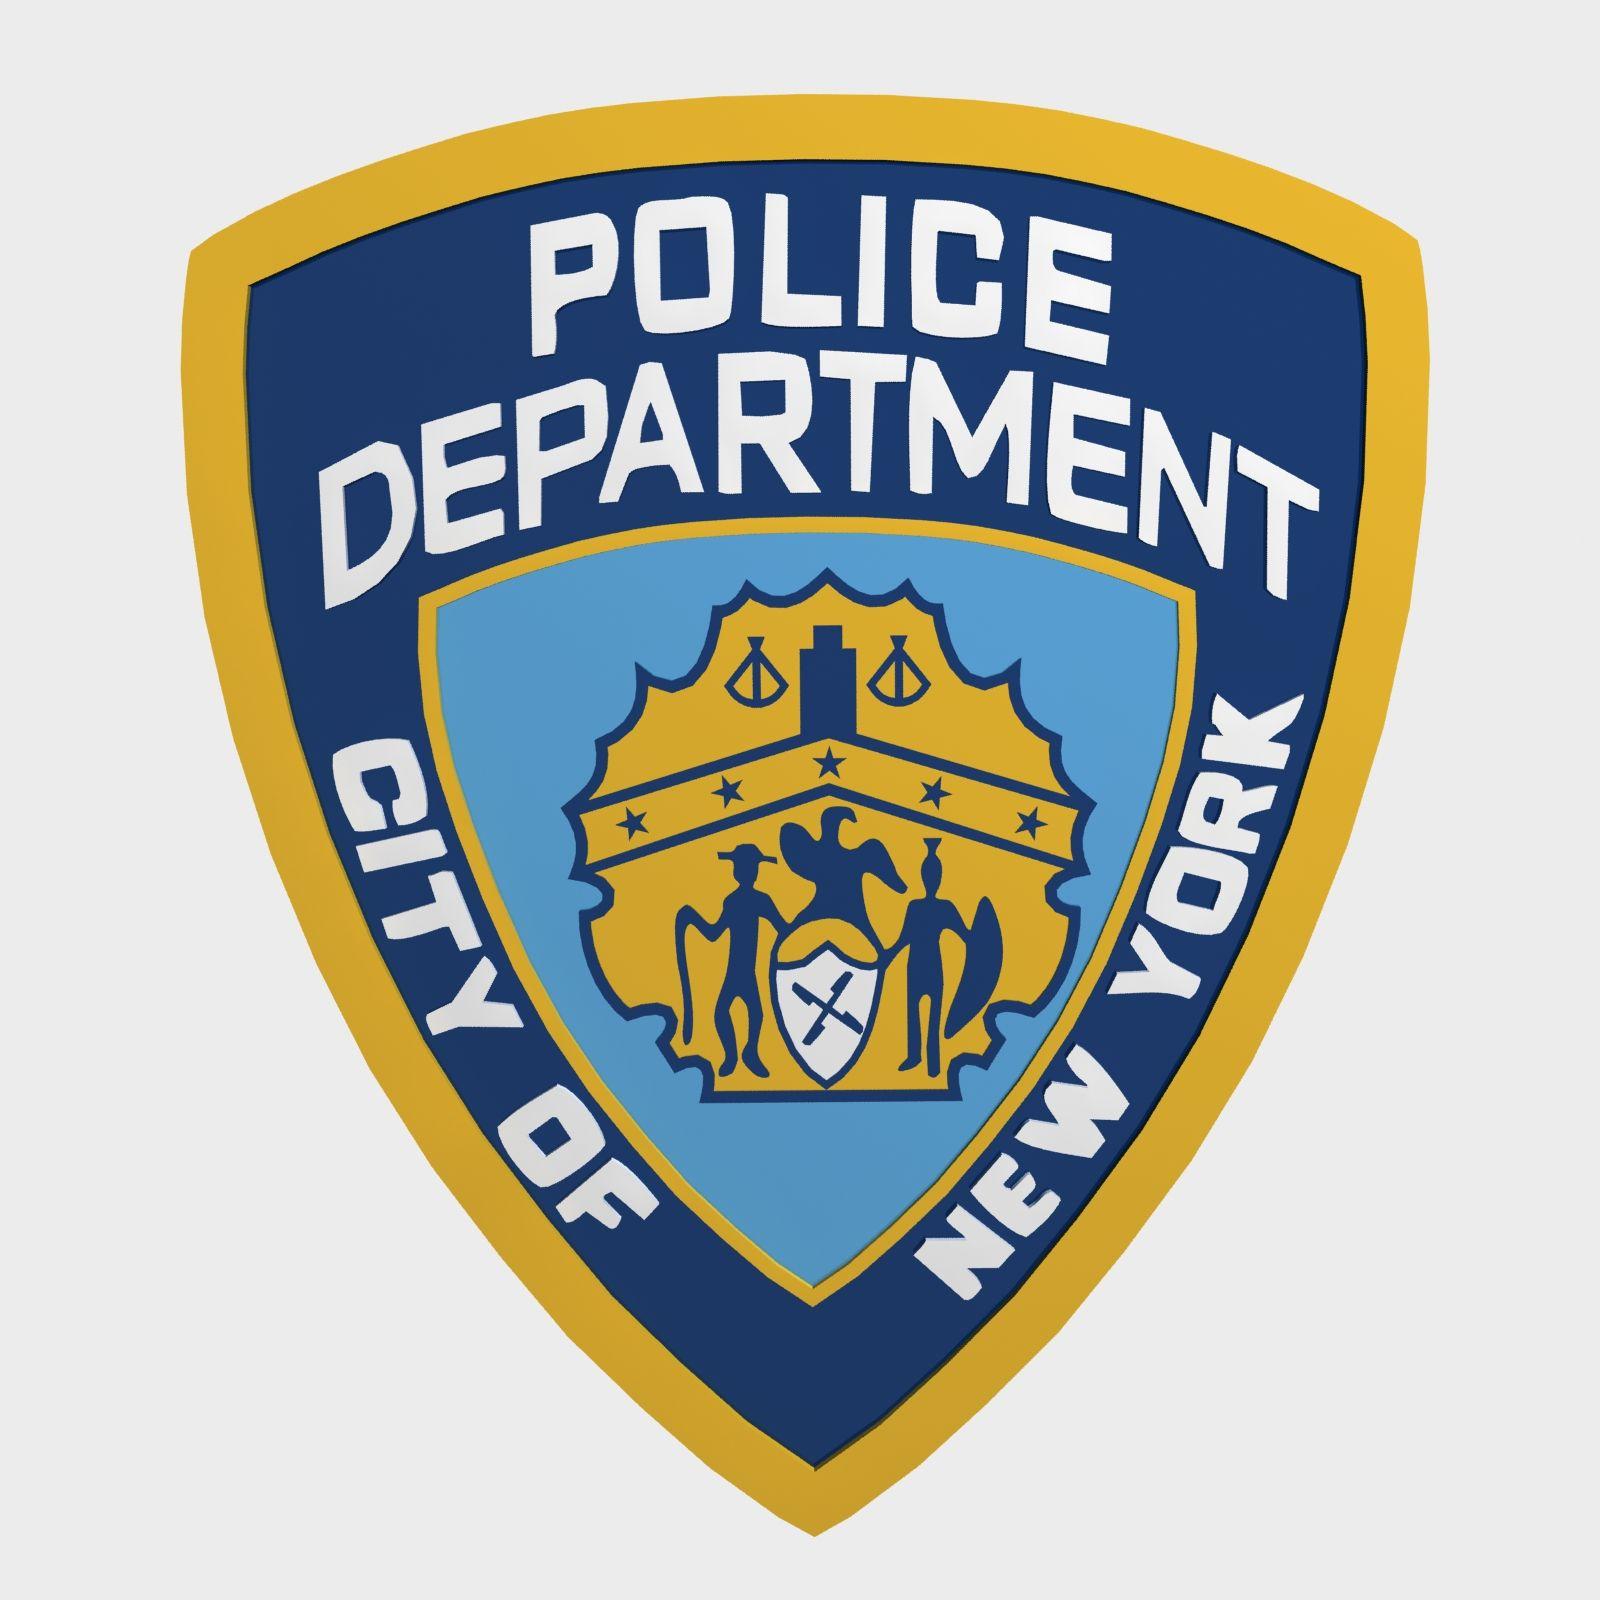 NYPD Logo - NYPD Police Department logo #Police, #NYPD, #logo, #Departmentd